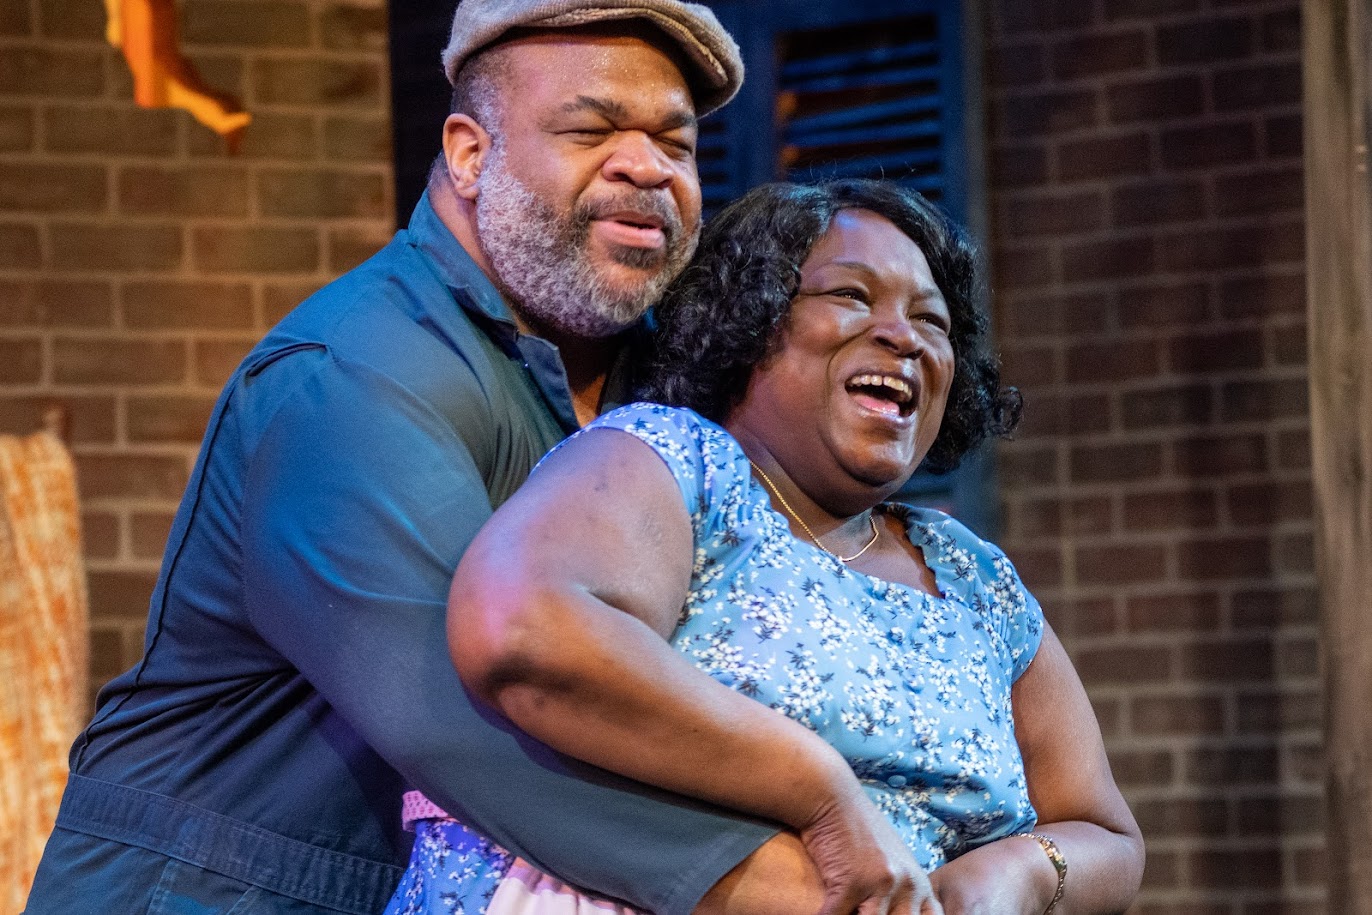 August Wilsons classic “Fences” explores the evolving African American experience, race relations at University Theatre Madison365